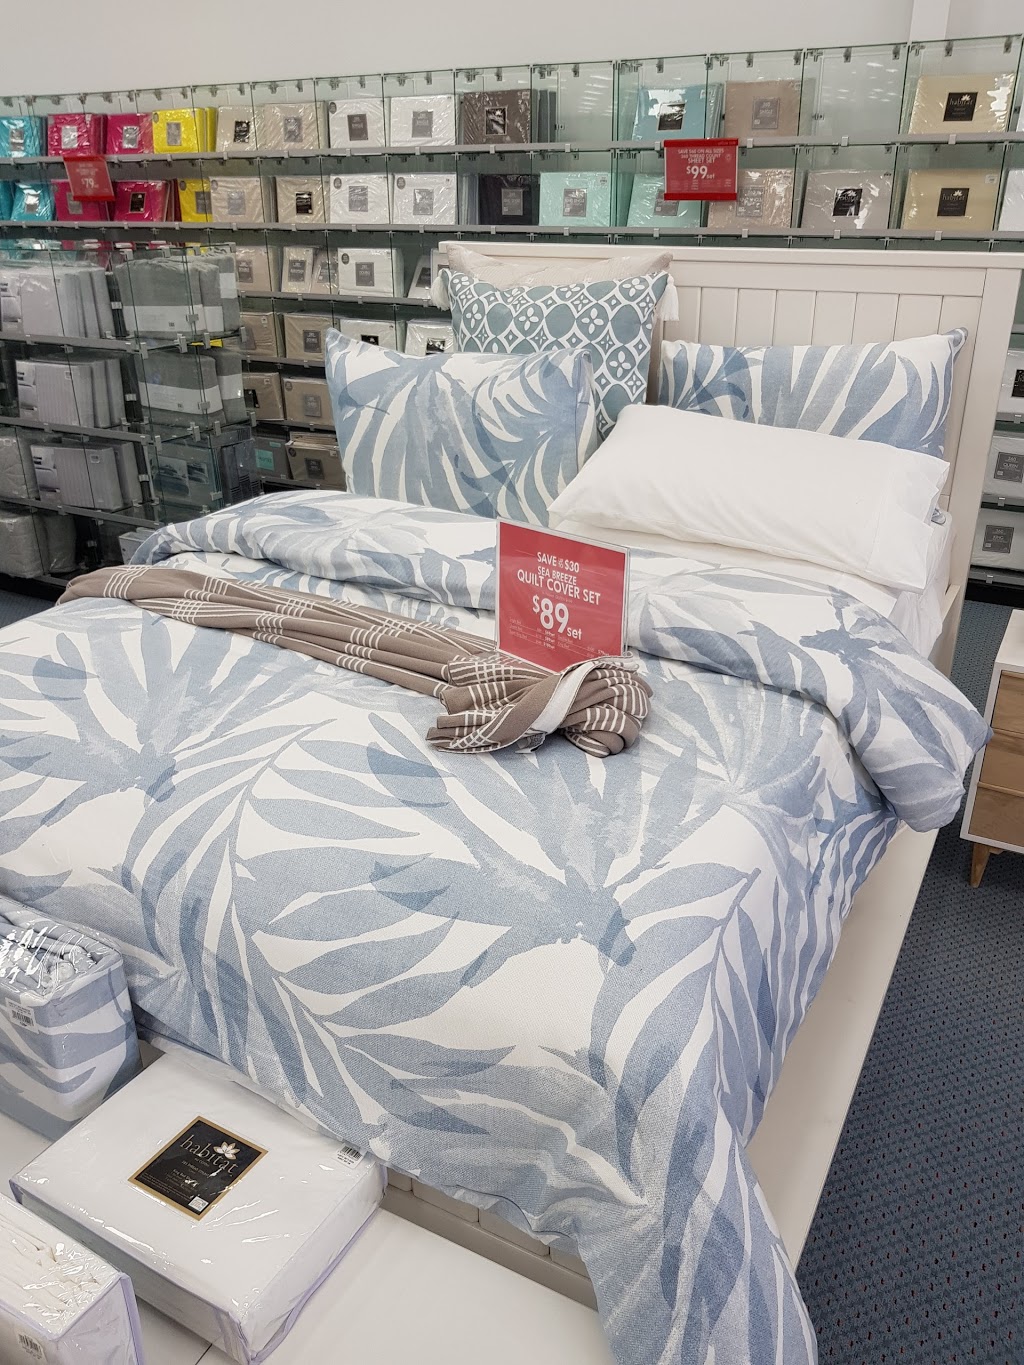 Pillow Talk Rutherford | furniture store | Unit 1/58 Shipley Dr, Rutherford NSW 2320, Australia | 0249327777 OR +61 2 4932 7777